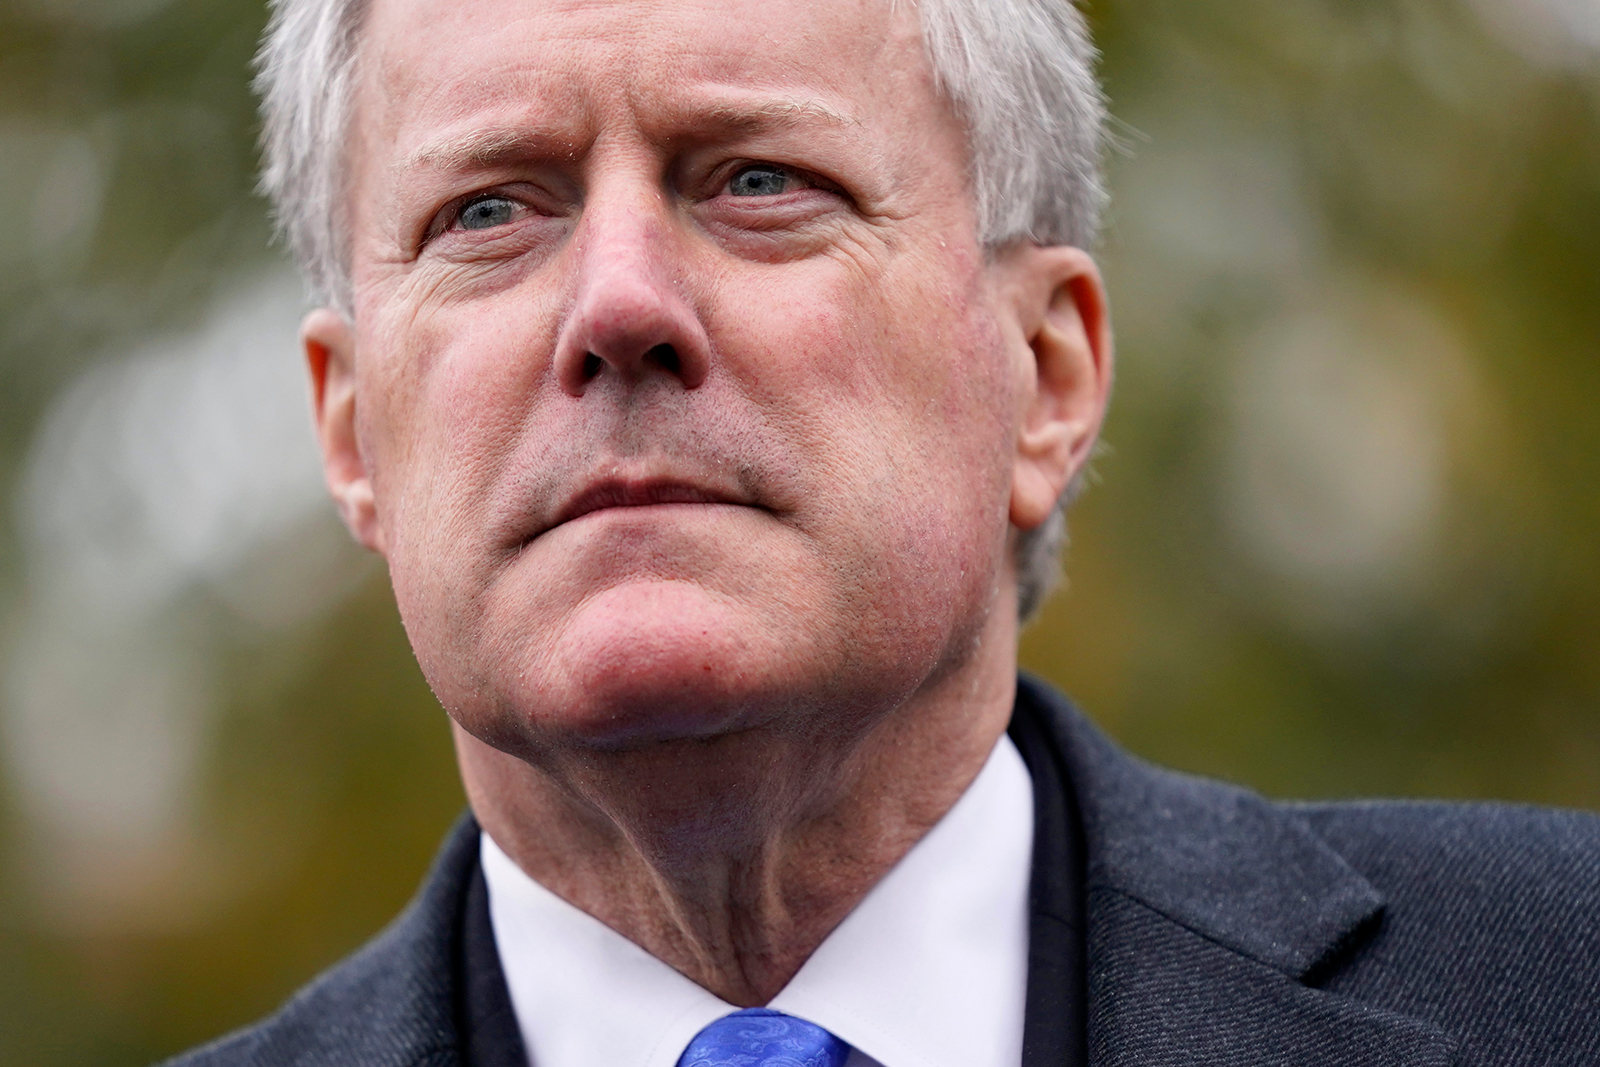 Former White House chief of staff Mark Meadows speaks with reporters outside the White House, Oct. 26, 2020, in Washington. (Patrick Semansky/AP)